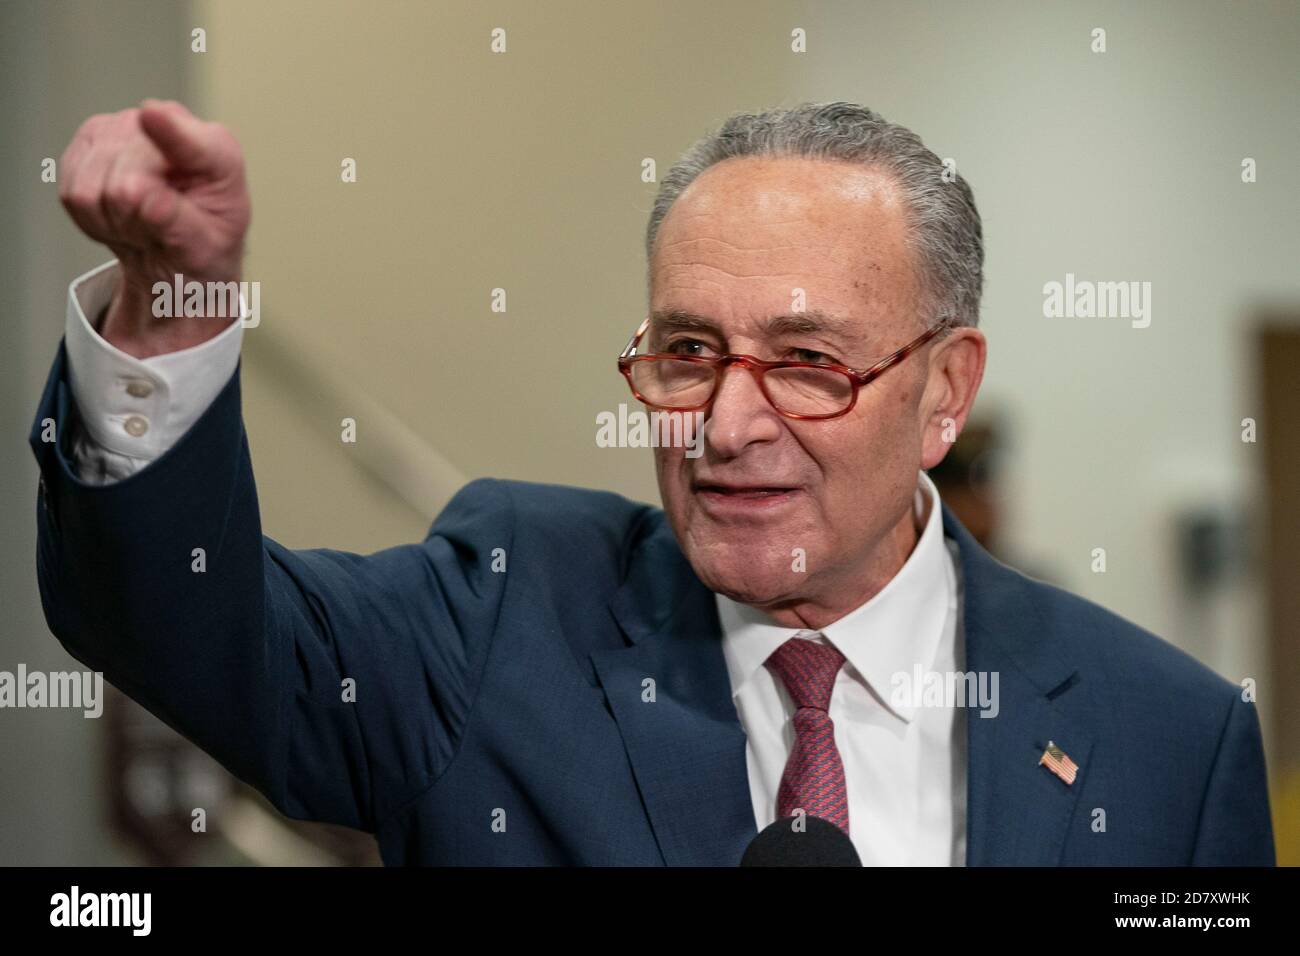 Minority Leader Chuck Schumer, a Democrat from New York, speaks to members of the media during a news conference at the U.S. Capitol in Washington, D.C., U.S., on Friday, Jan. 31, 2020. Credit: Alex Edelman/The Photo Access Stock Photo